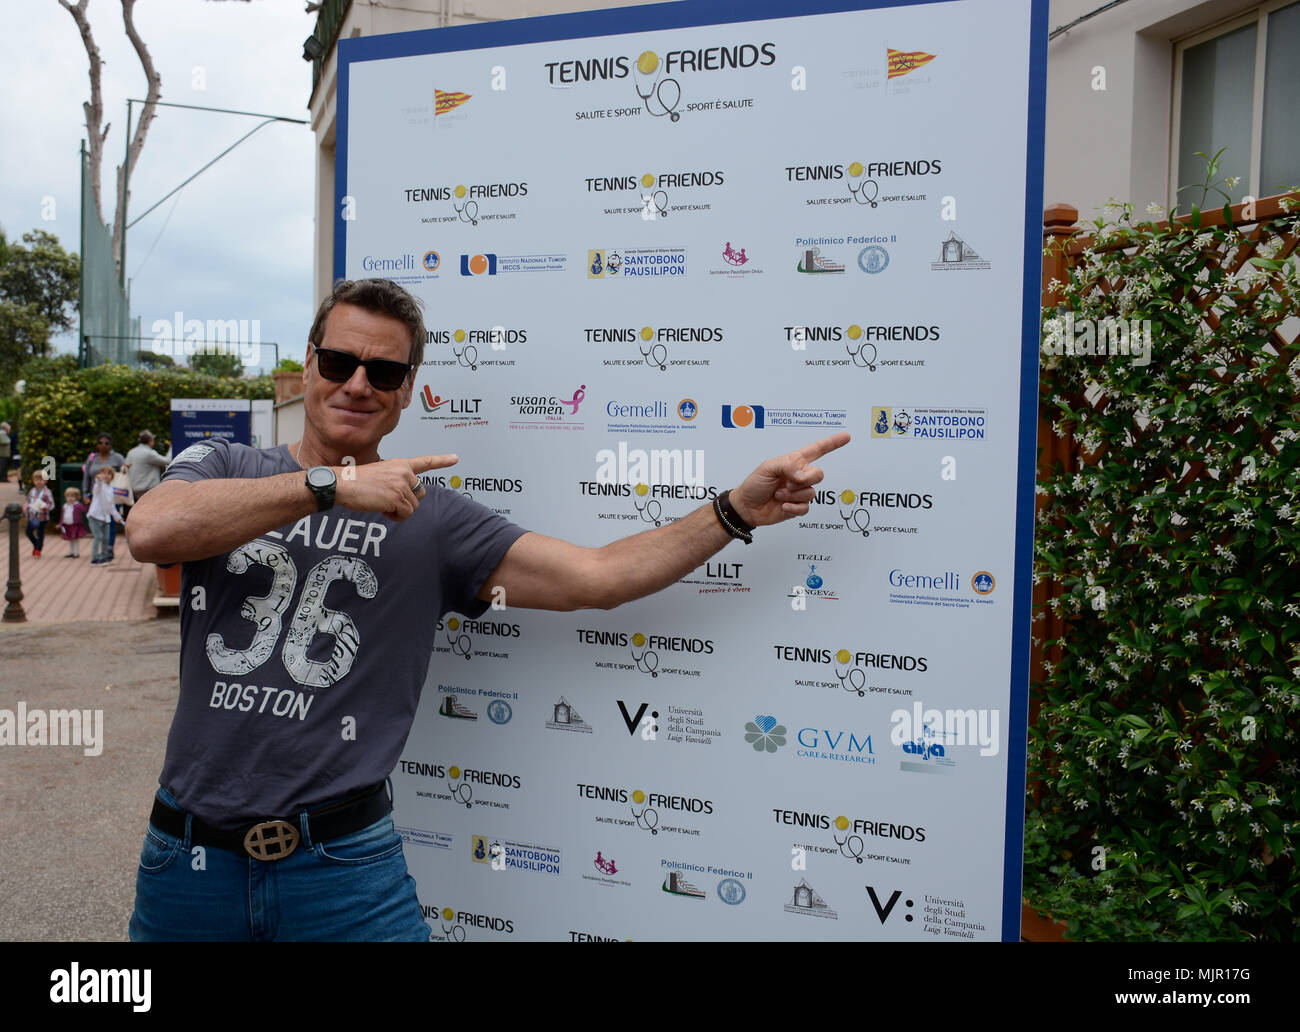 Naples, Italy. 05 May, 2018. Jimmy Ghione also know as Gianluigi Ghione, the italian tv personality and actor at the event 'Tennis and Friends' a national event, founded in 2011 on the initiative of Friends For Health for the prevention and promotion of health. Stock Photo